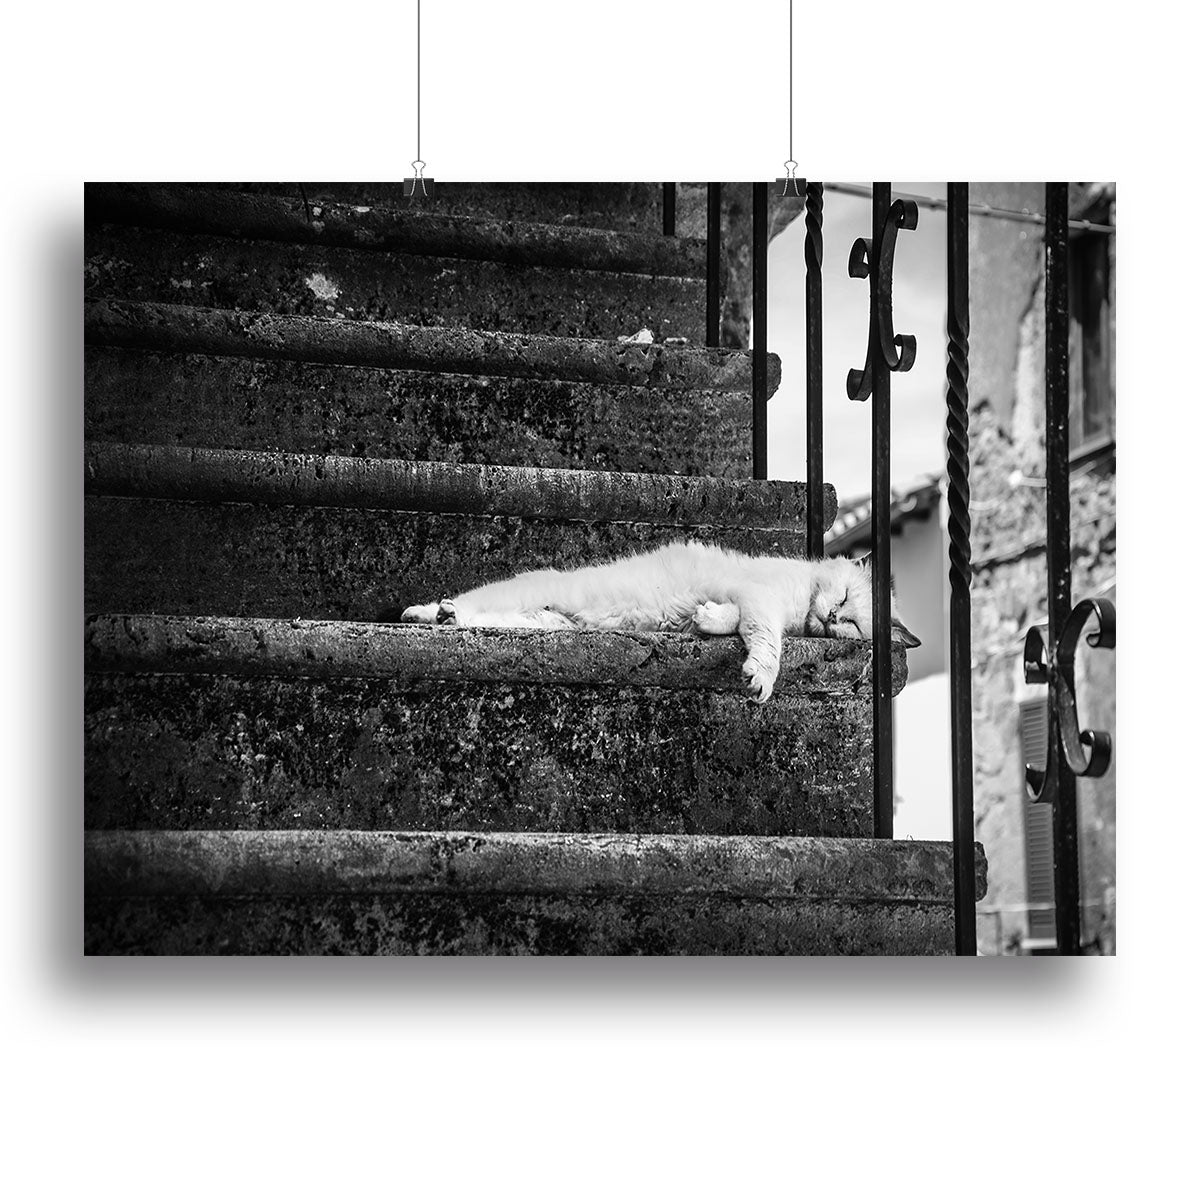 Slow life Canvas Print or Poster - 1x - 2